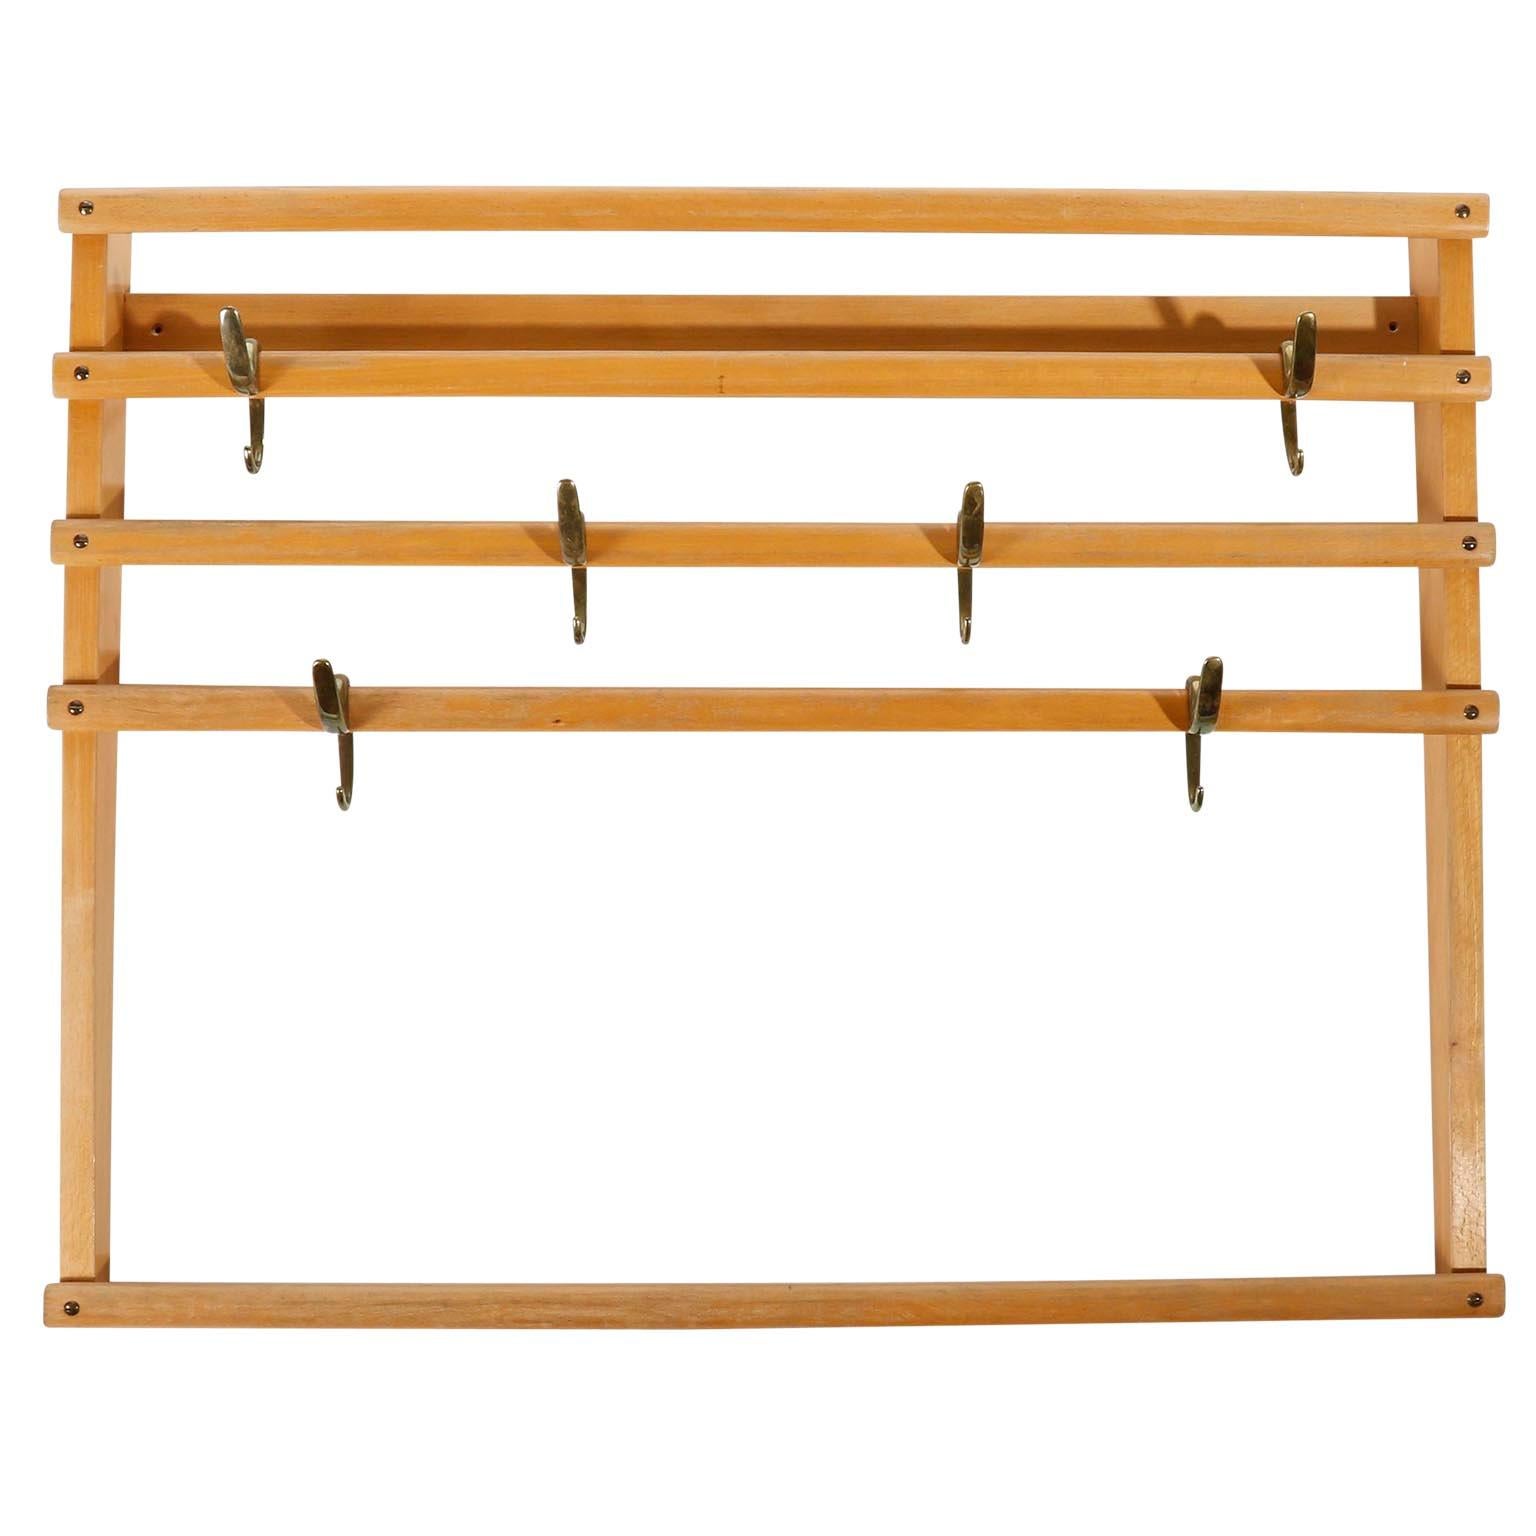 A coat rack by Carl Auböck, Vienna, Austria, manufactured in midcentury, circa 1950.
It is made of a beechwood frame in an aged and very warm tone. There are six patinated brass hooks (similar to bronze) which can be positioned randomly on the